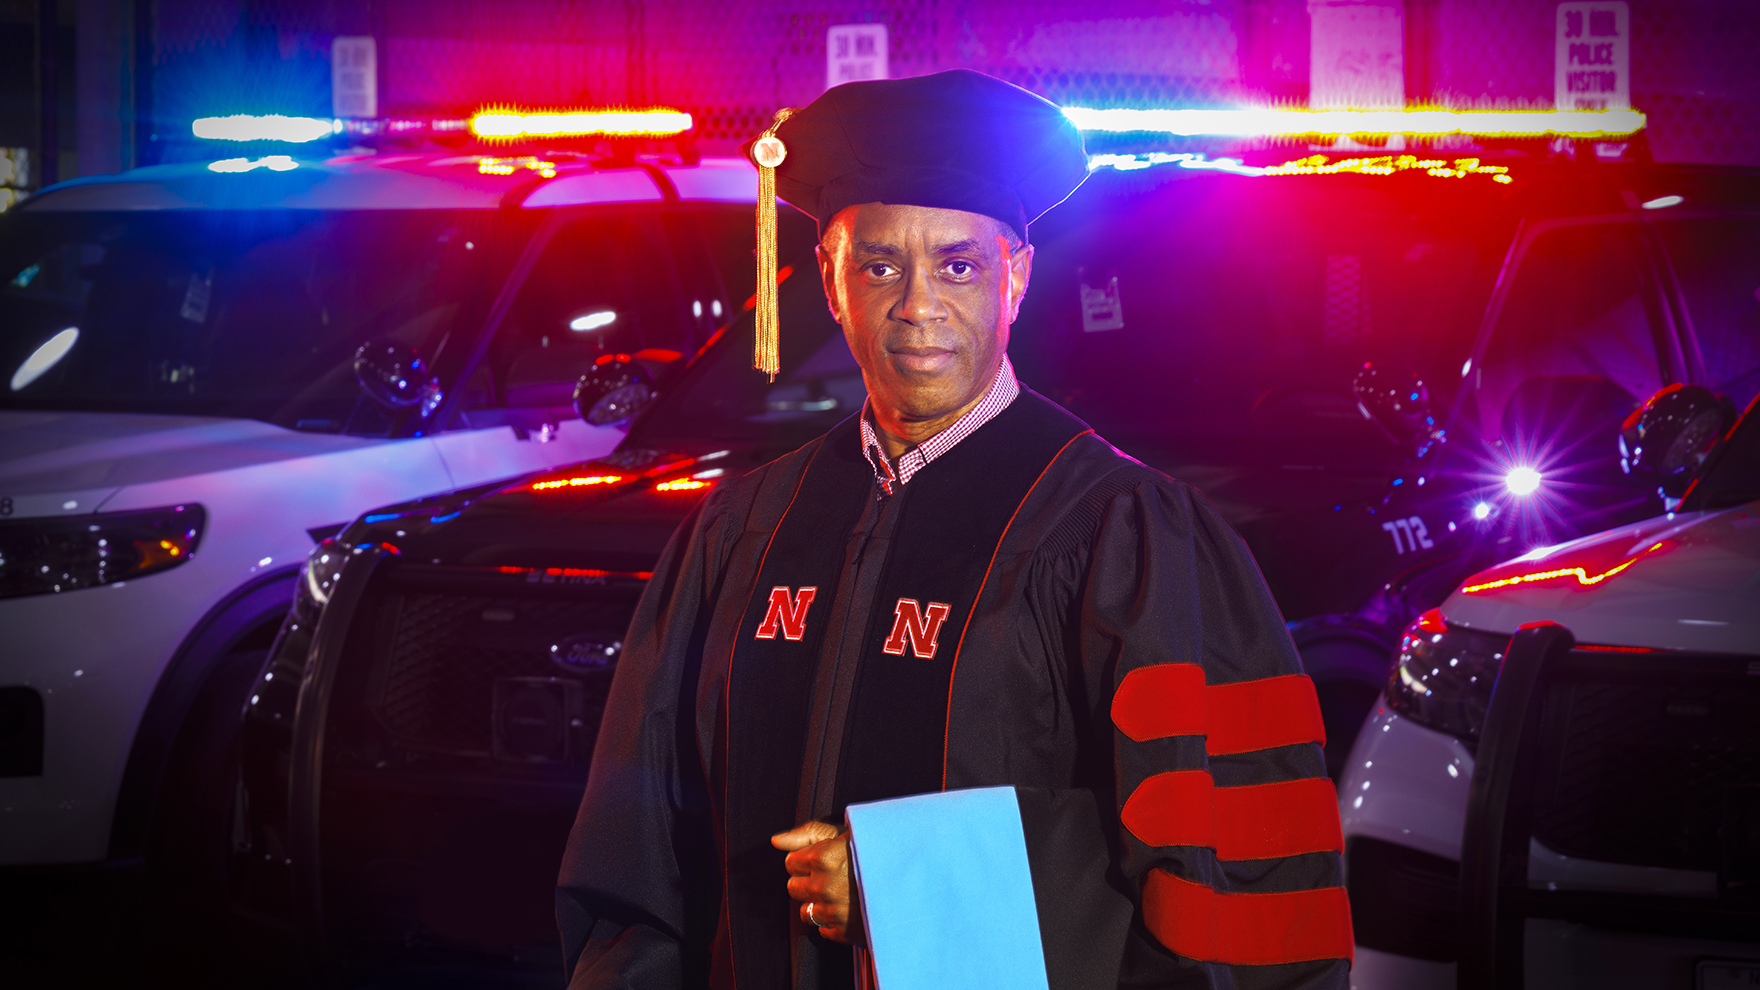 Hassan Ramzah, UNL's chief of police, has earned a doctorate with a focus on educational leadership and higher education. His dissertation focused on the implementation of community policing at another university in the Midwest. His adviser was Elizabeth Niehaus, associate professor of educational administration.